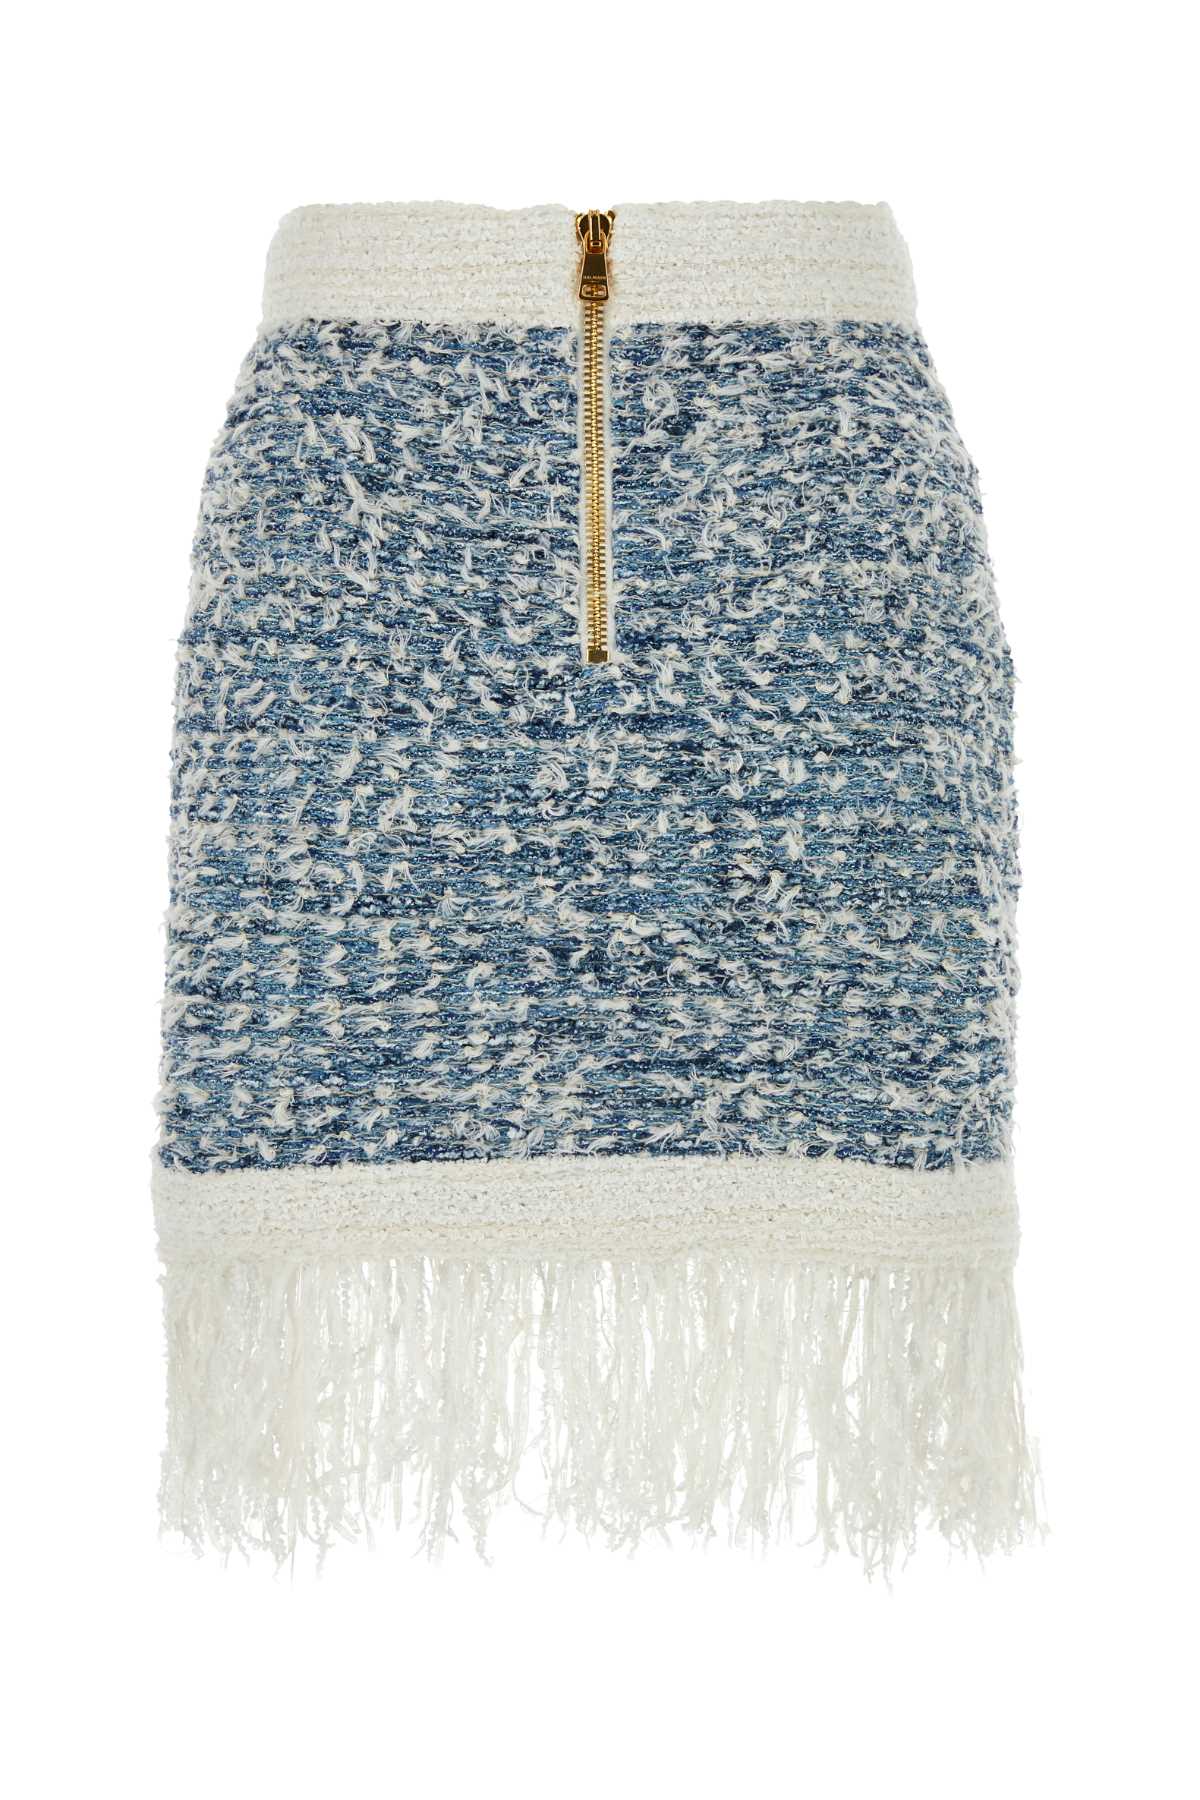 Balmain Embroidered Tweed Skirt In Blue